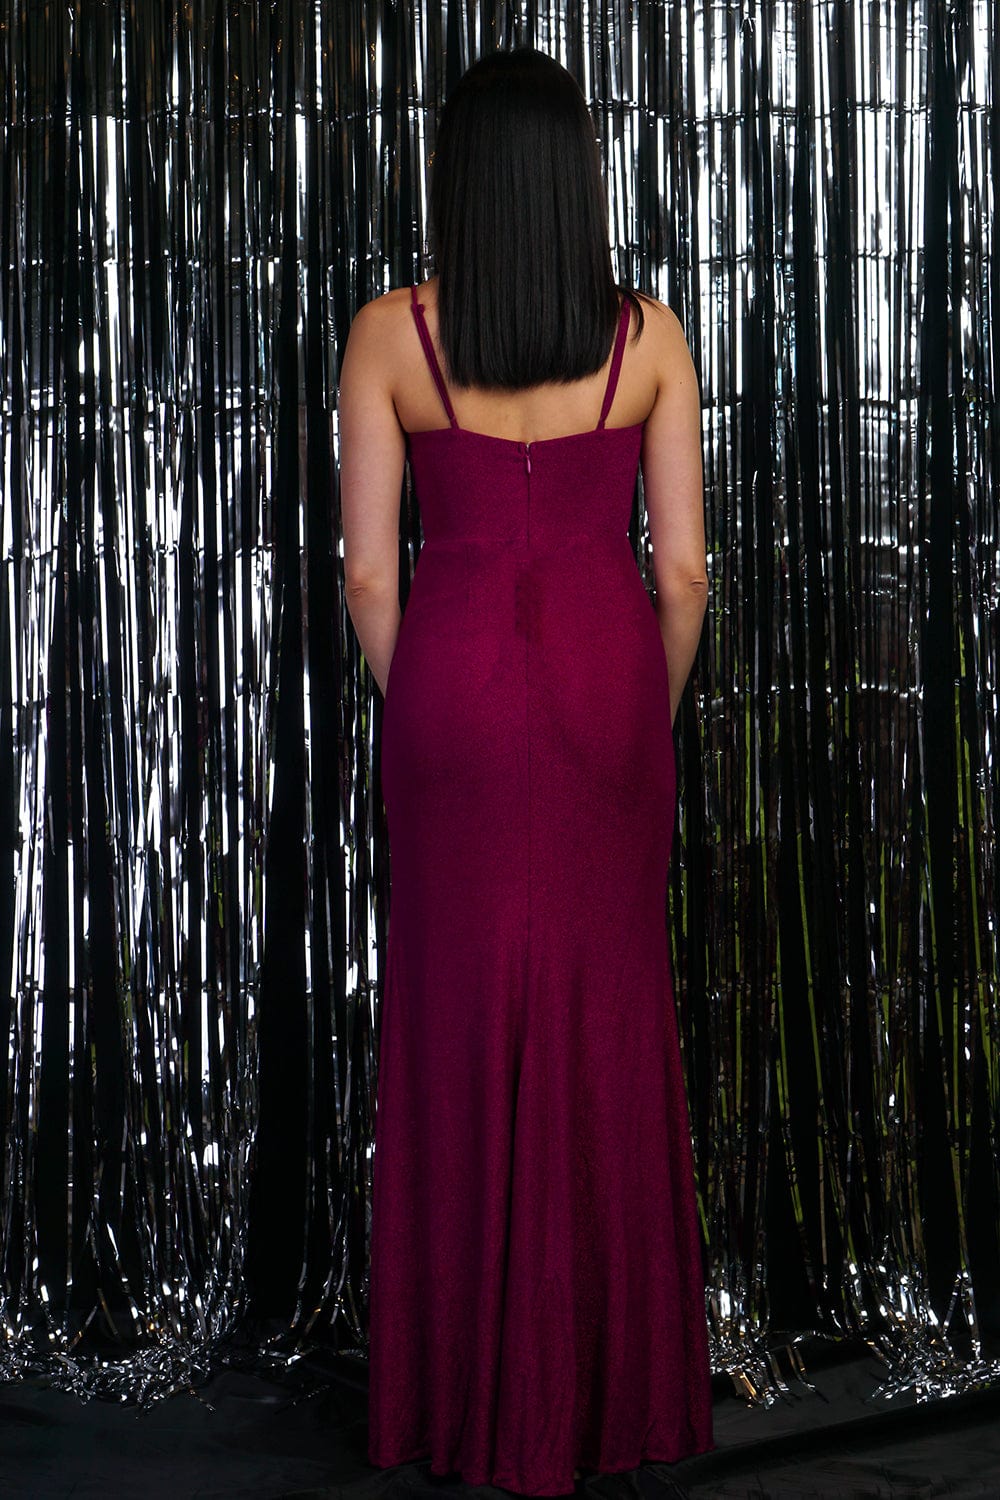 GOWNS Magenta Strap Cut Out Glitter Slit Gown - Chloe Dao